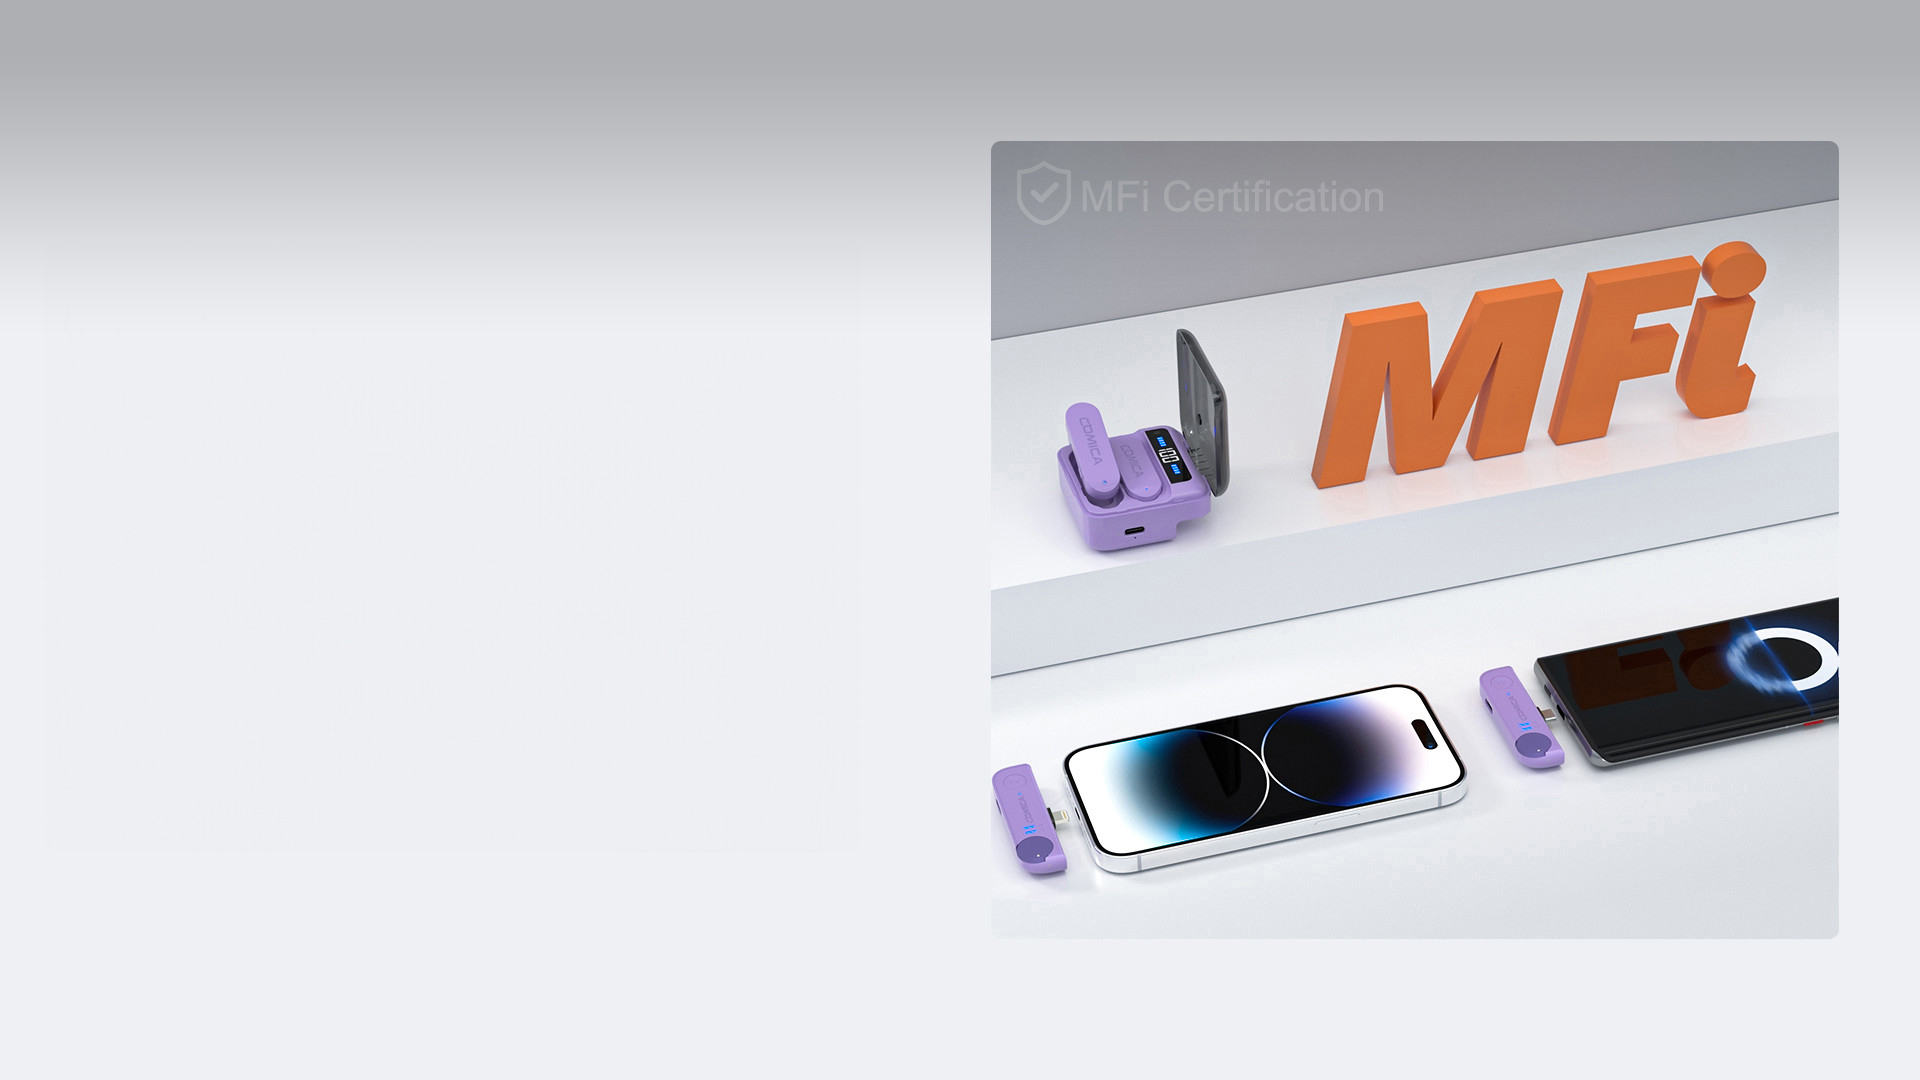 Dual Versions to Fit All Your Devices(MFi Certification)